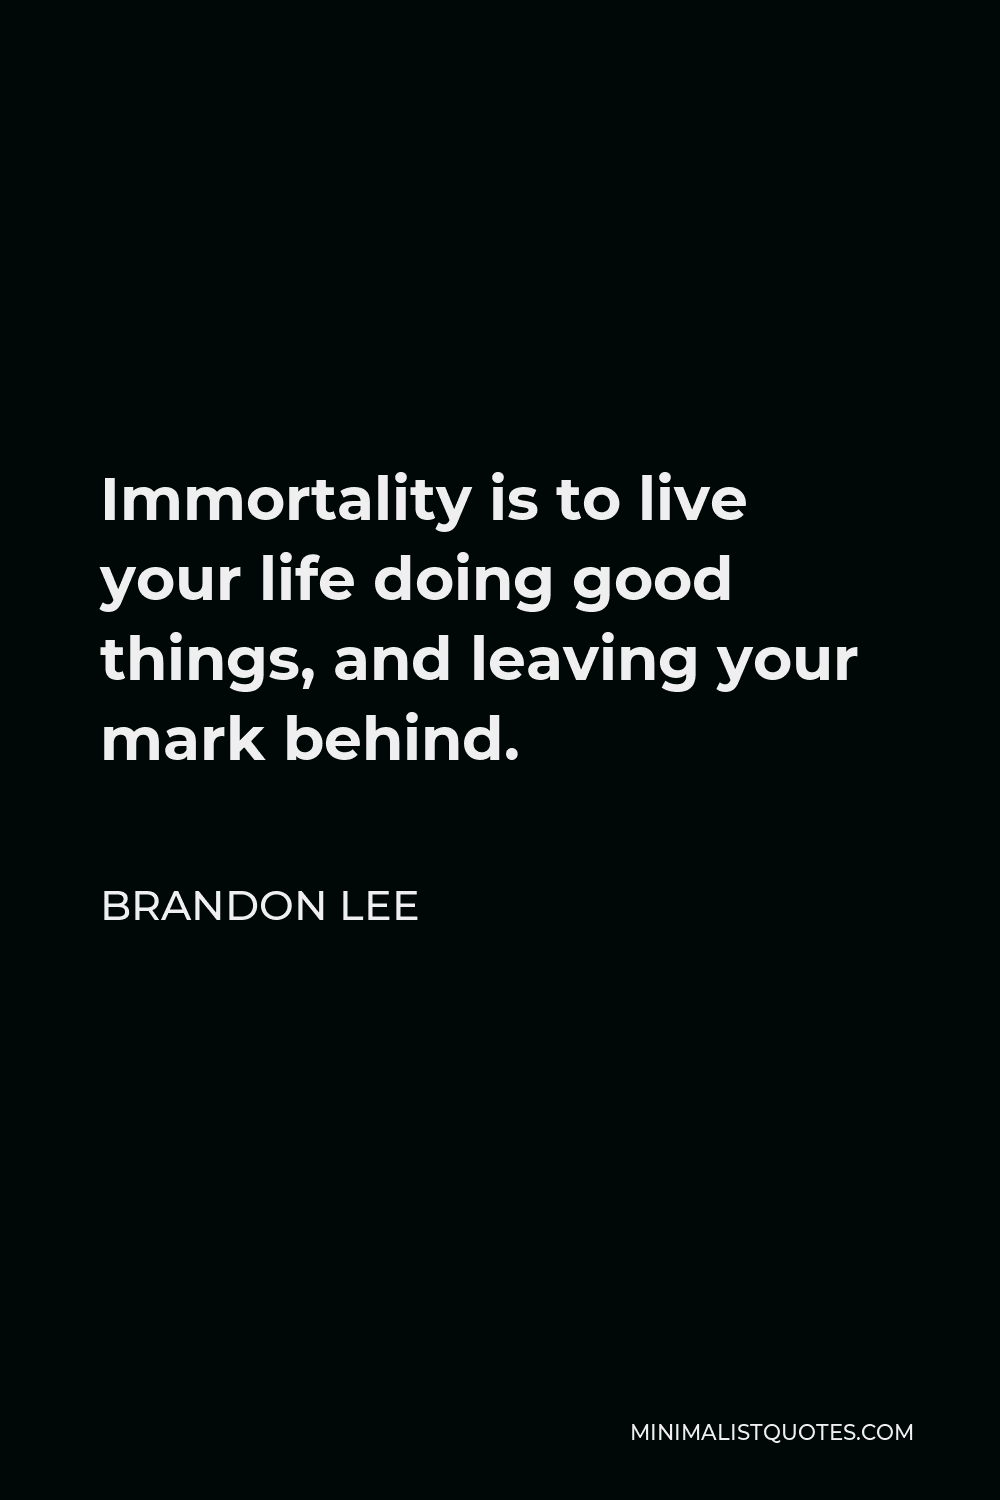 Brandon Lee Quote - Immortality is to live your life doing good things, and leaving your mark behind.